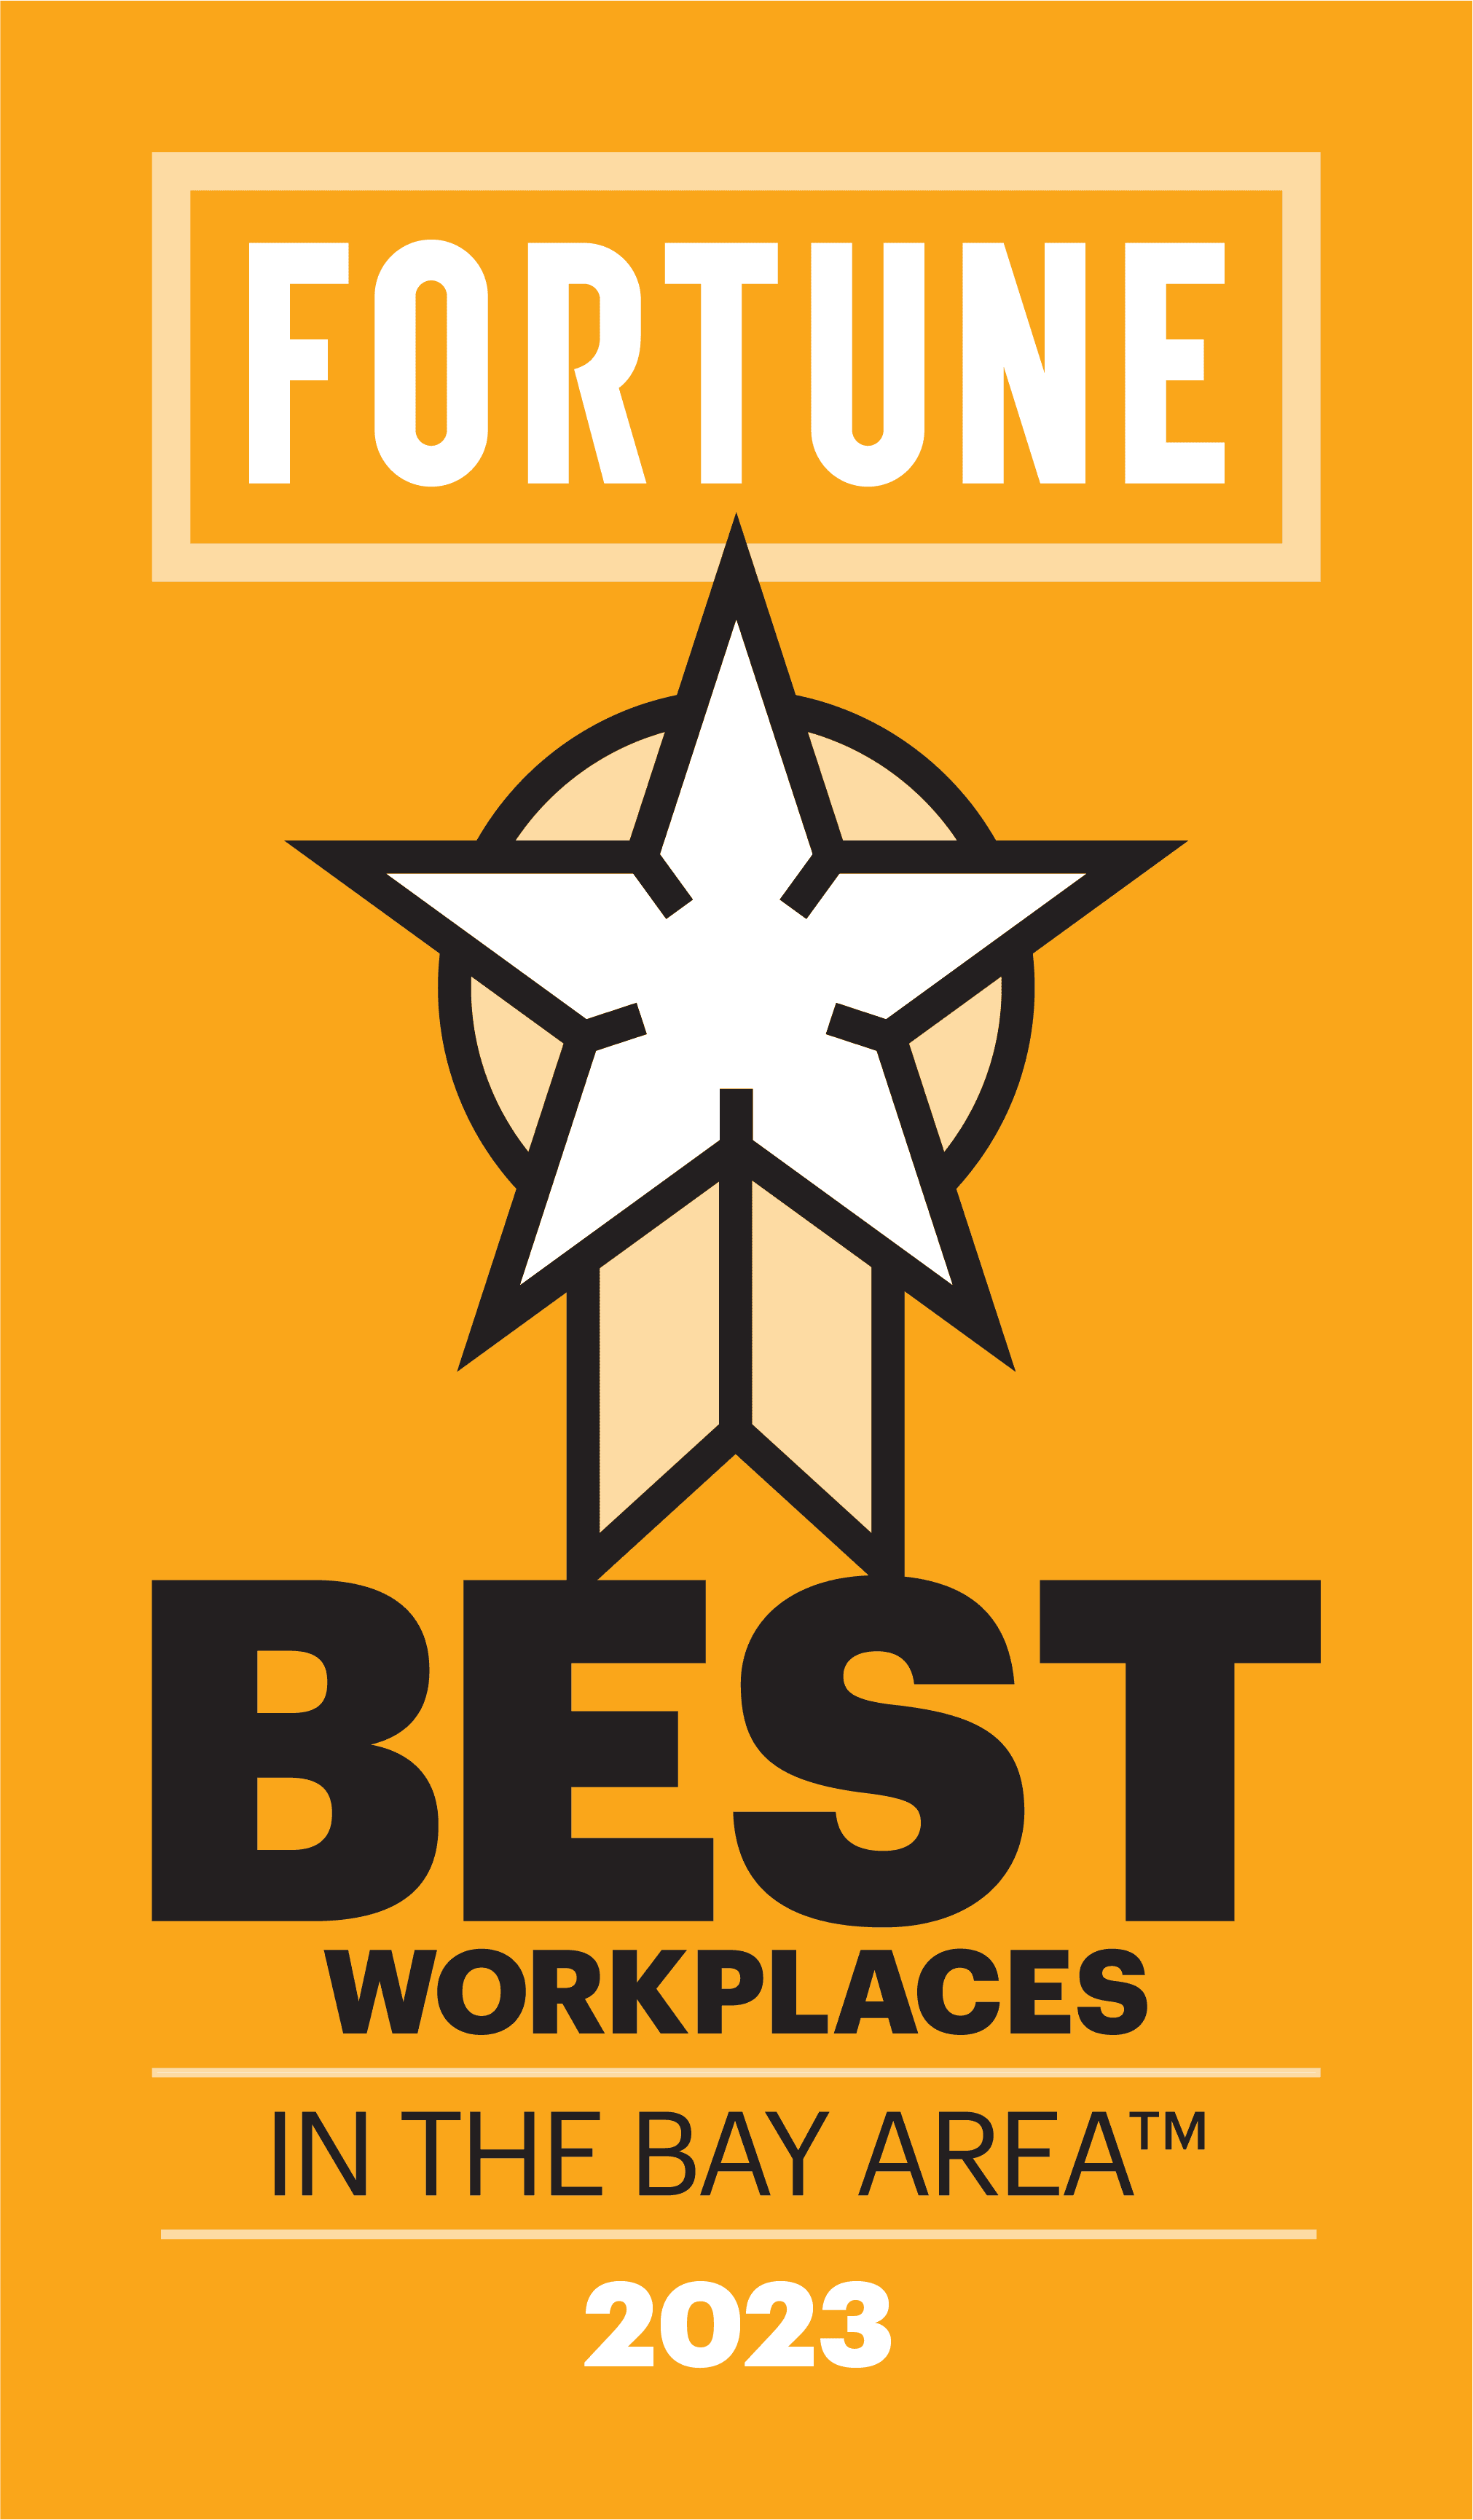 Fortune Best Workplaces in the Bay Area